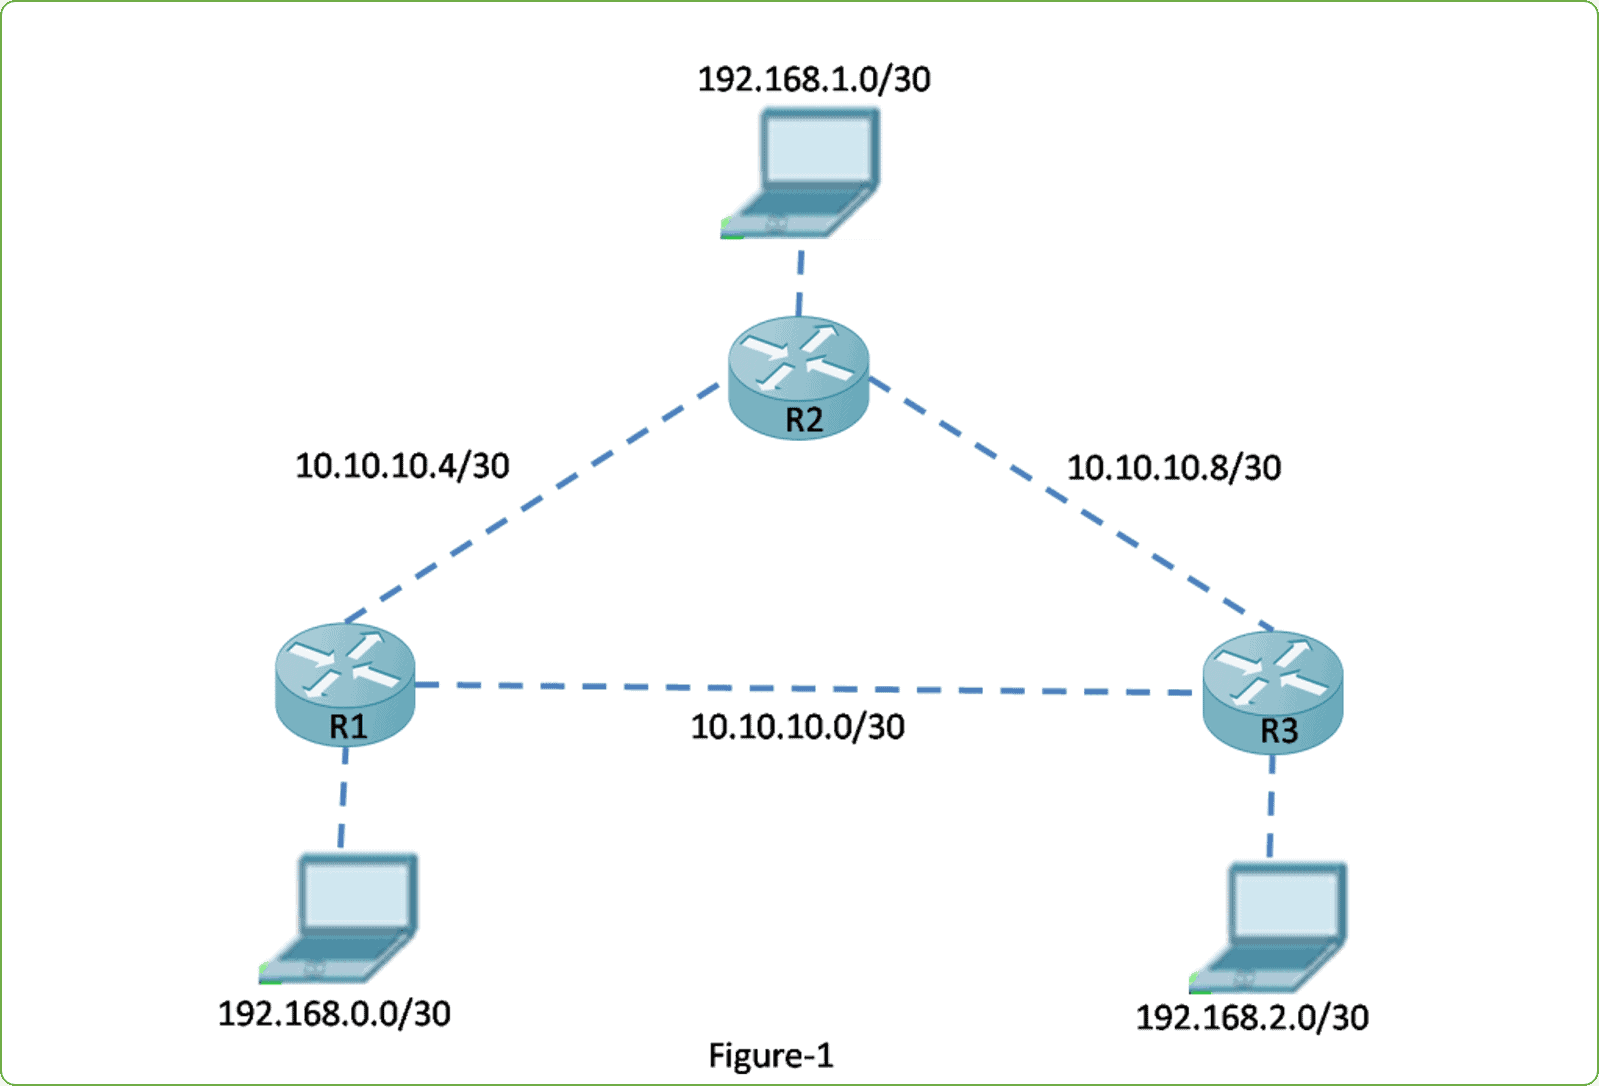 Introduction to “Router EIGRP” Command